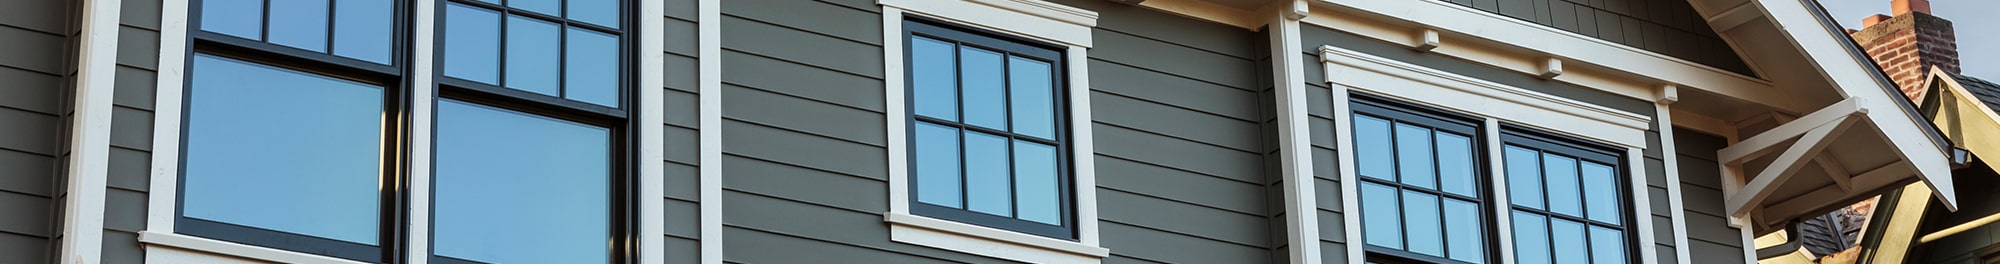 Window replacement & installation company in Muskego & New Berlin